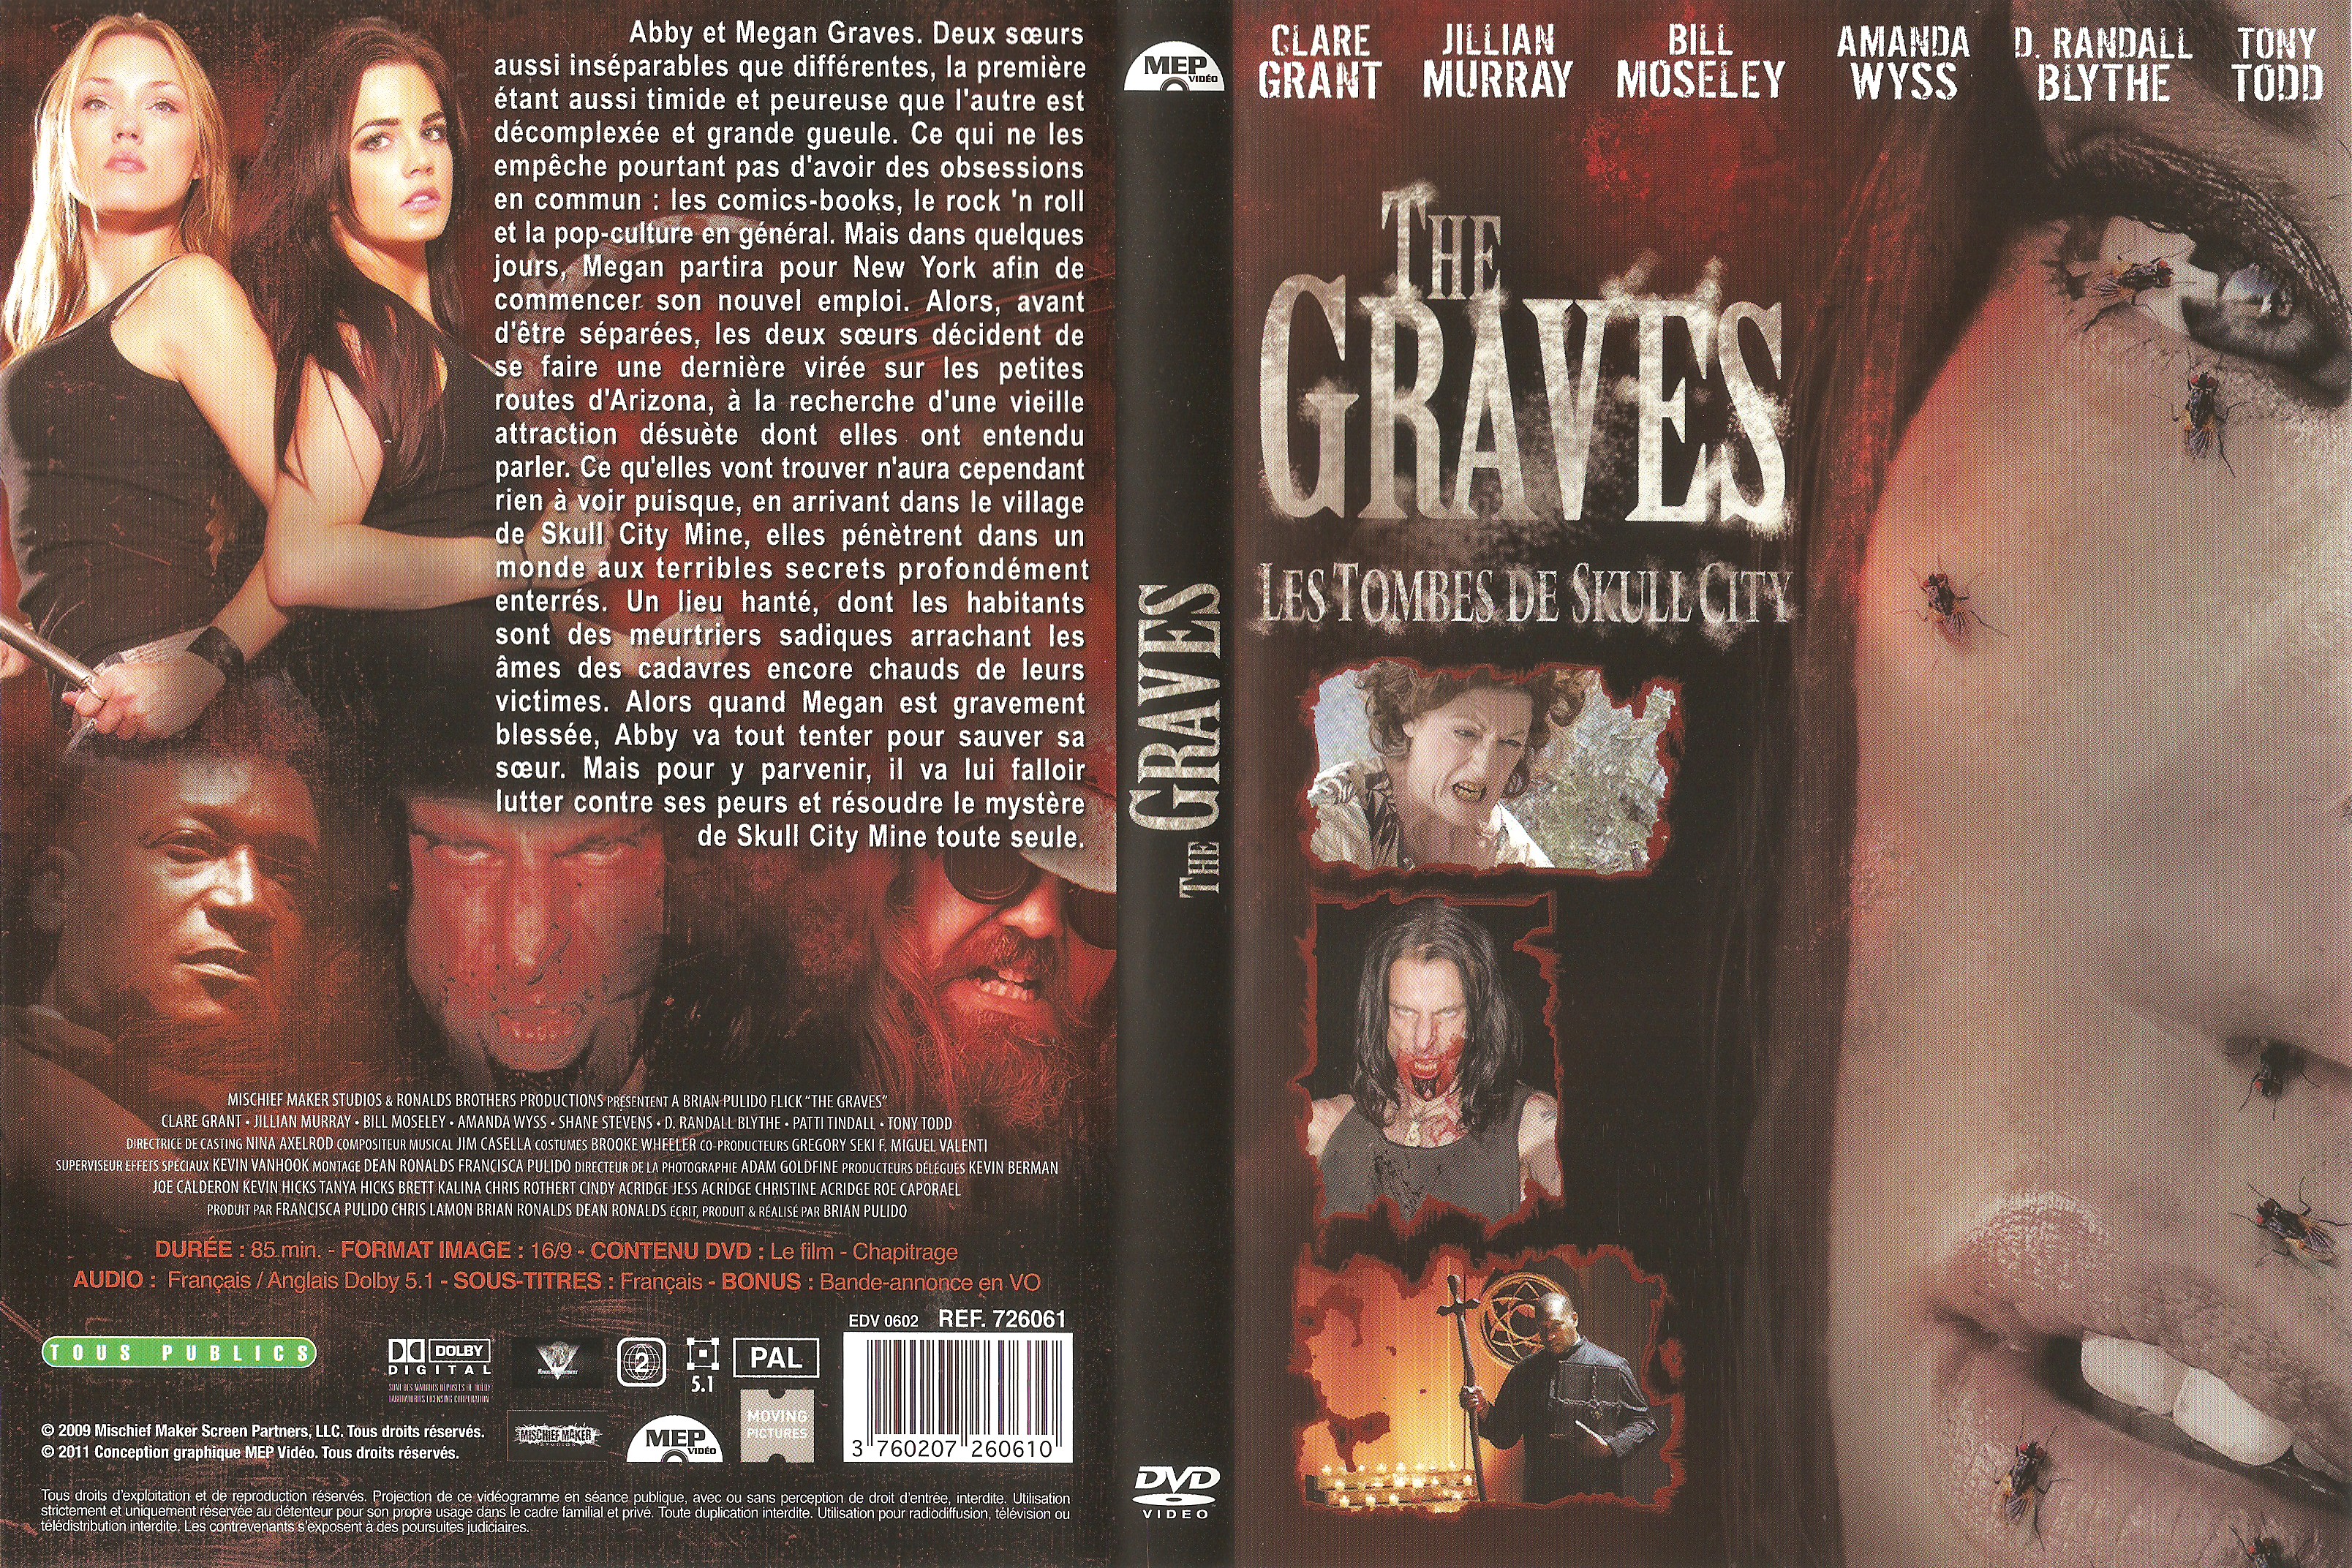 Jaquette DVD The Graves